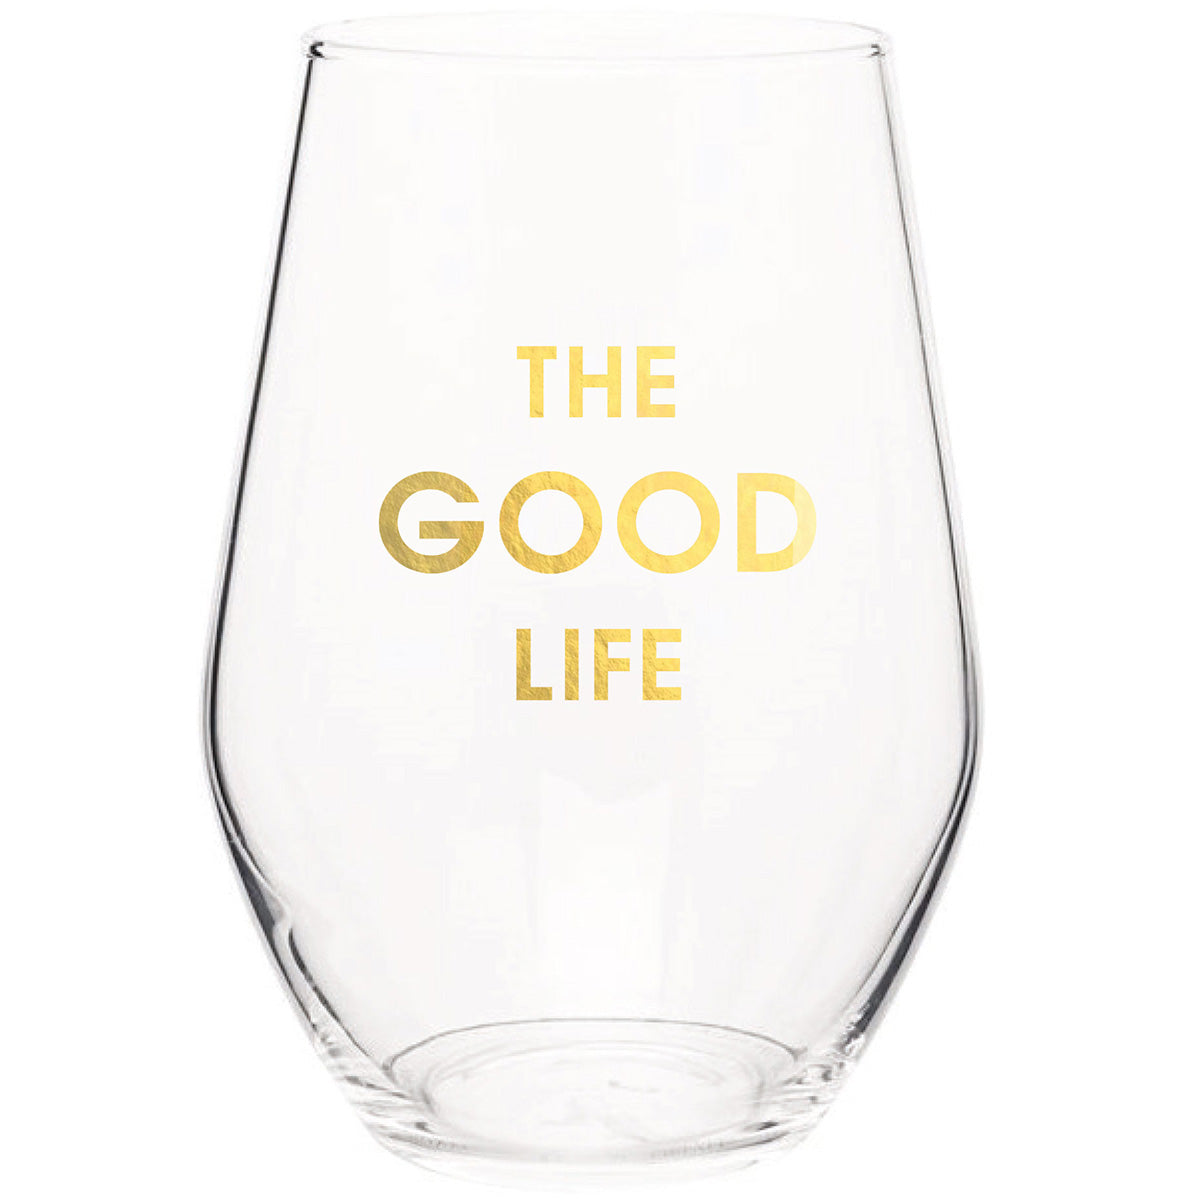 The Good Life - Gold Foil Stemless Wine Glass (Slight Imperfections)